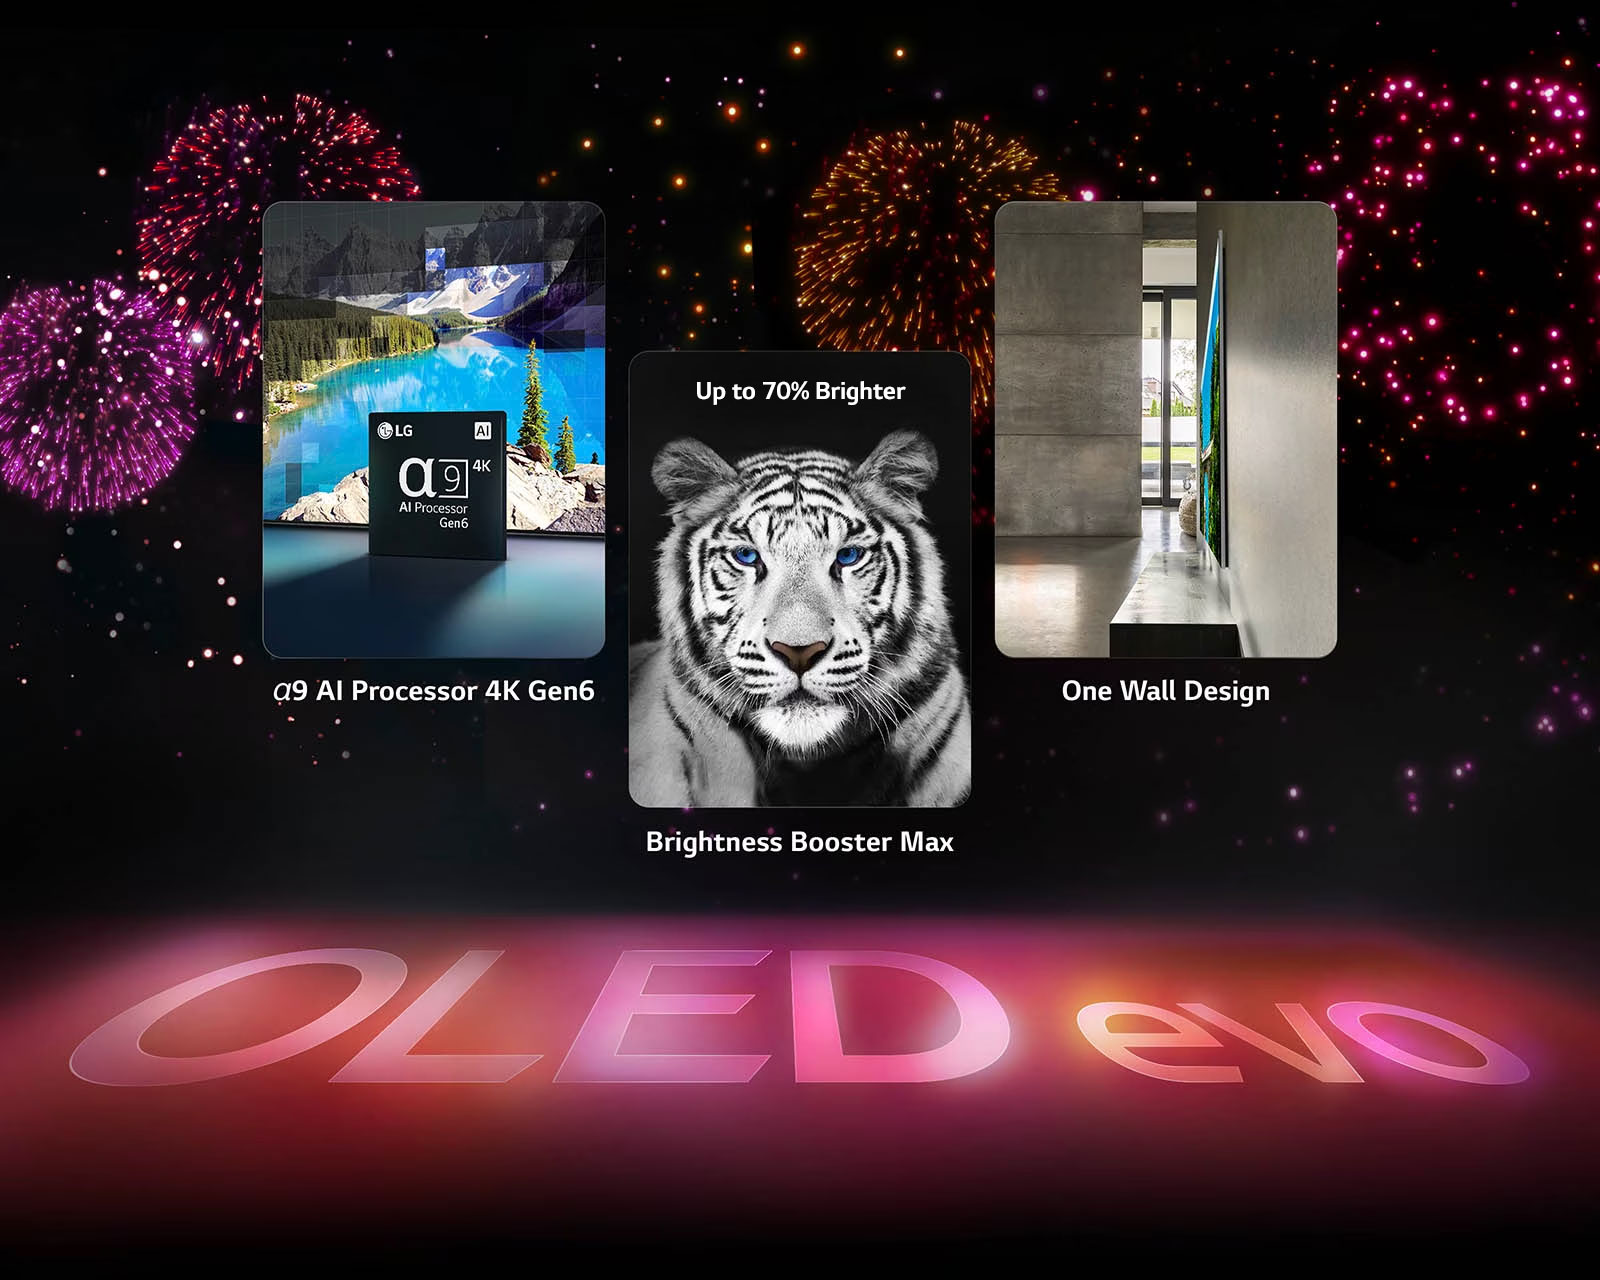 An image presenting the key features of the LG OLED evo G3 against a black background with a pink and purple firework display. The pink reflection from the firework display on the ground shows the words "OLED evo." Within the picture, an image depicting the α9 AI Processor 4K Gen6 shows the chip standing before a picture of a lake scene being remastered with the processing technology. An image presenting Brightness Booster Max shows a tiger with deep contrast and bright whites. An image presenting the 5-Year Panel Warranty shows the Premium OLED G3 warranty logo with the display in the backdrop. An image presenting One Wall Design shows LG OLED evo G3 flush against the wall in a grey industrial living space. 	  